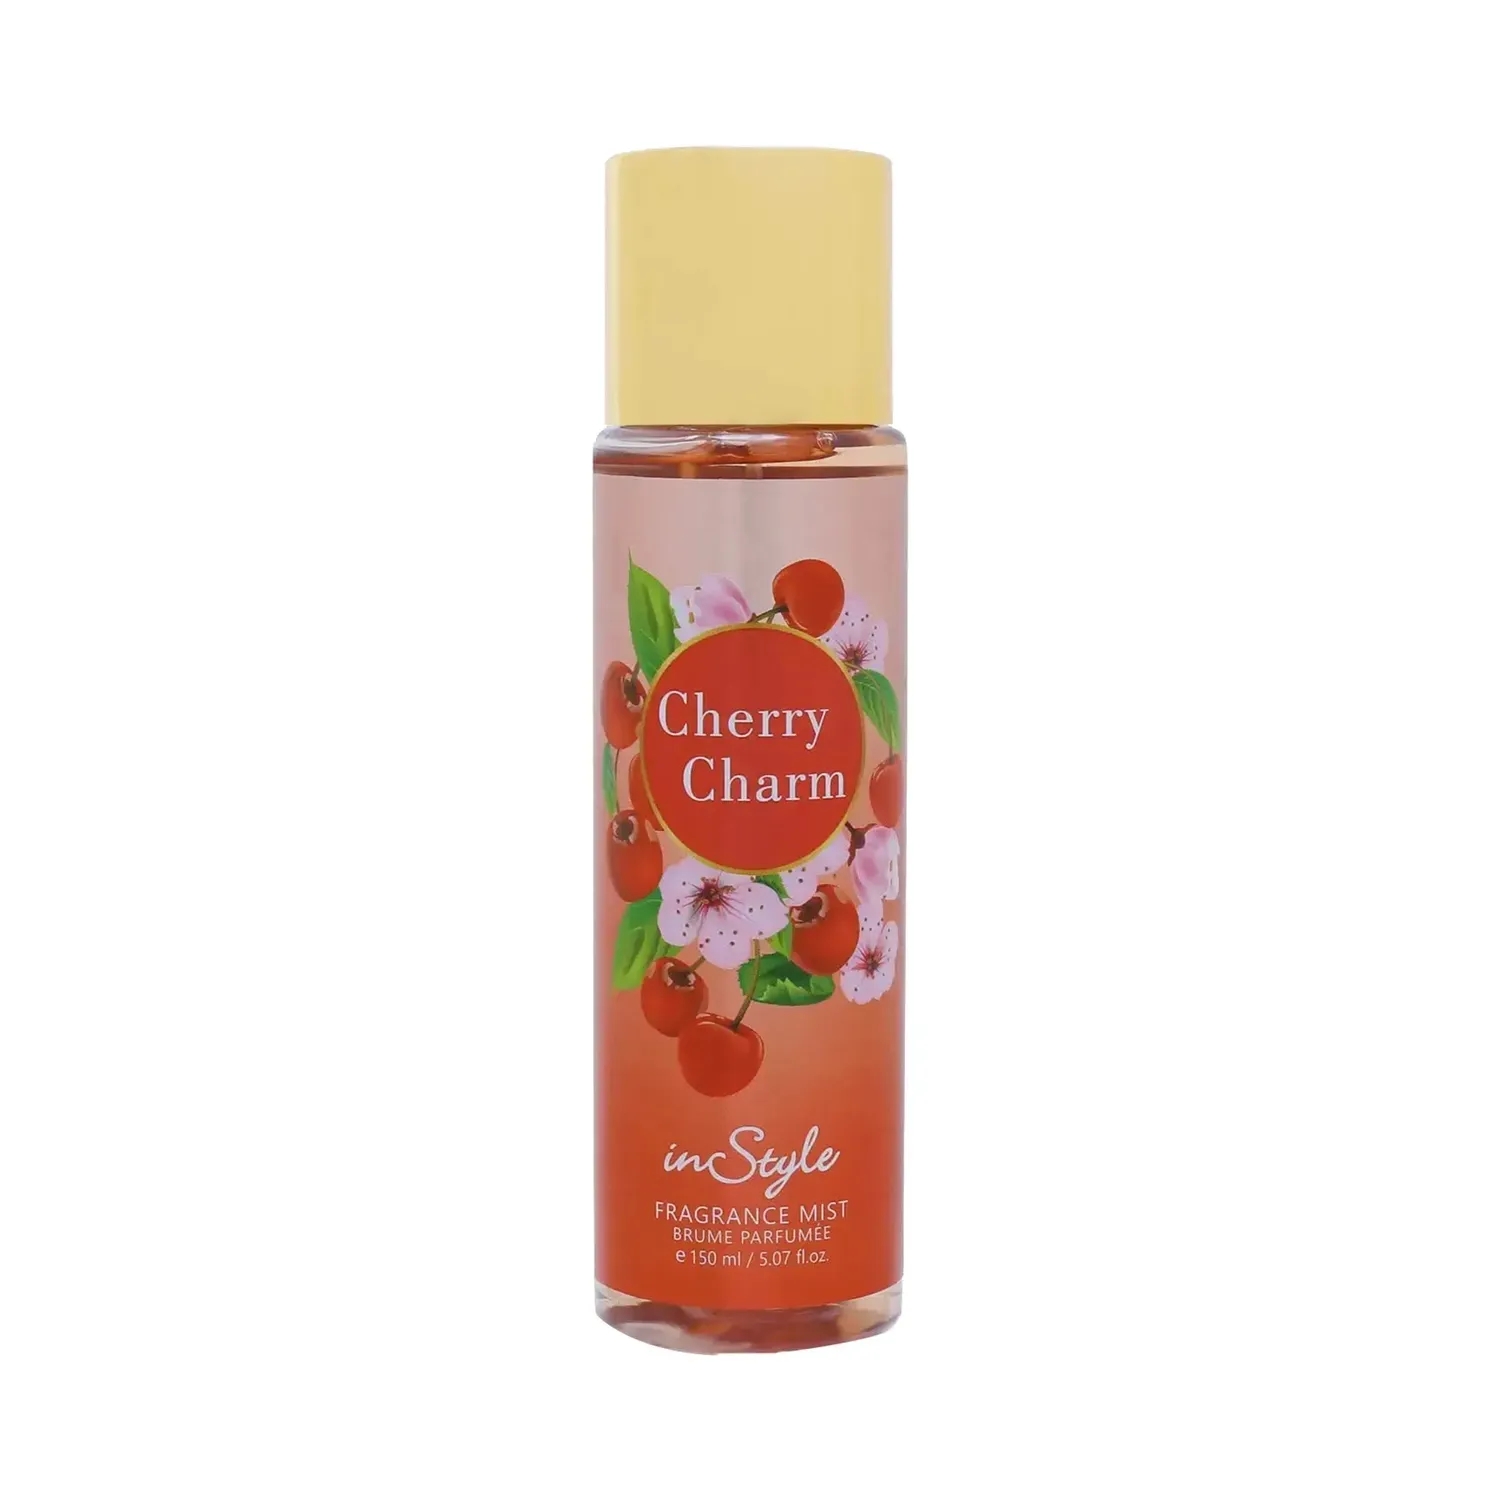 Instyle | InStyle Cherry Charm Fragrance Mist Perfume (150ml)